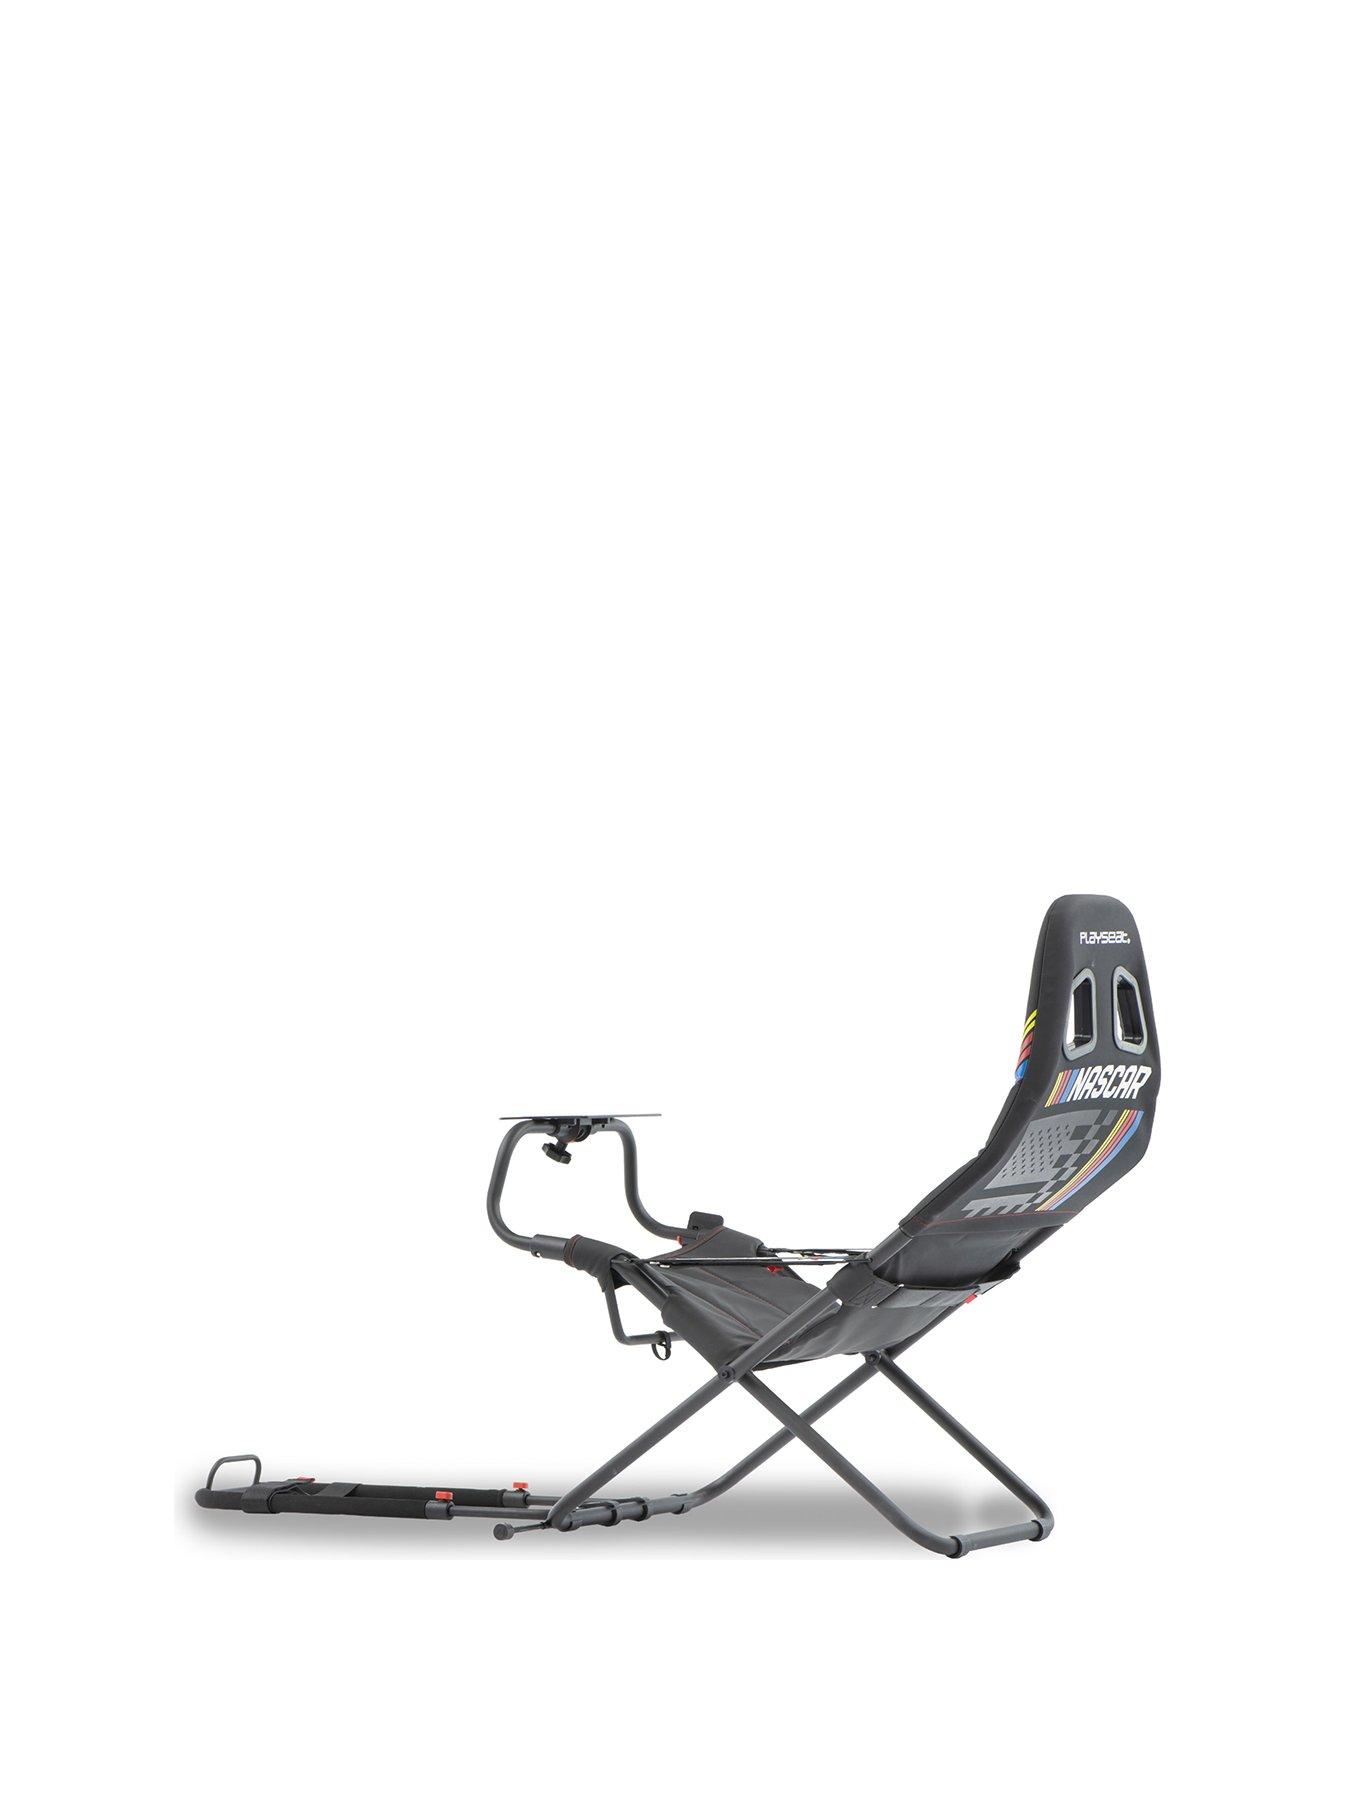 PlaySeat Playseat Challenge - NASCAR Edition *LIMITED EDITION